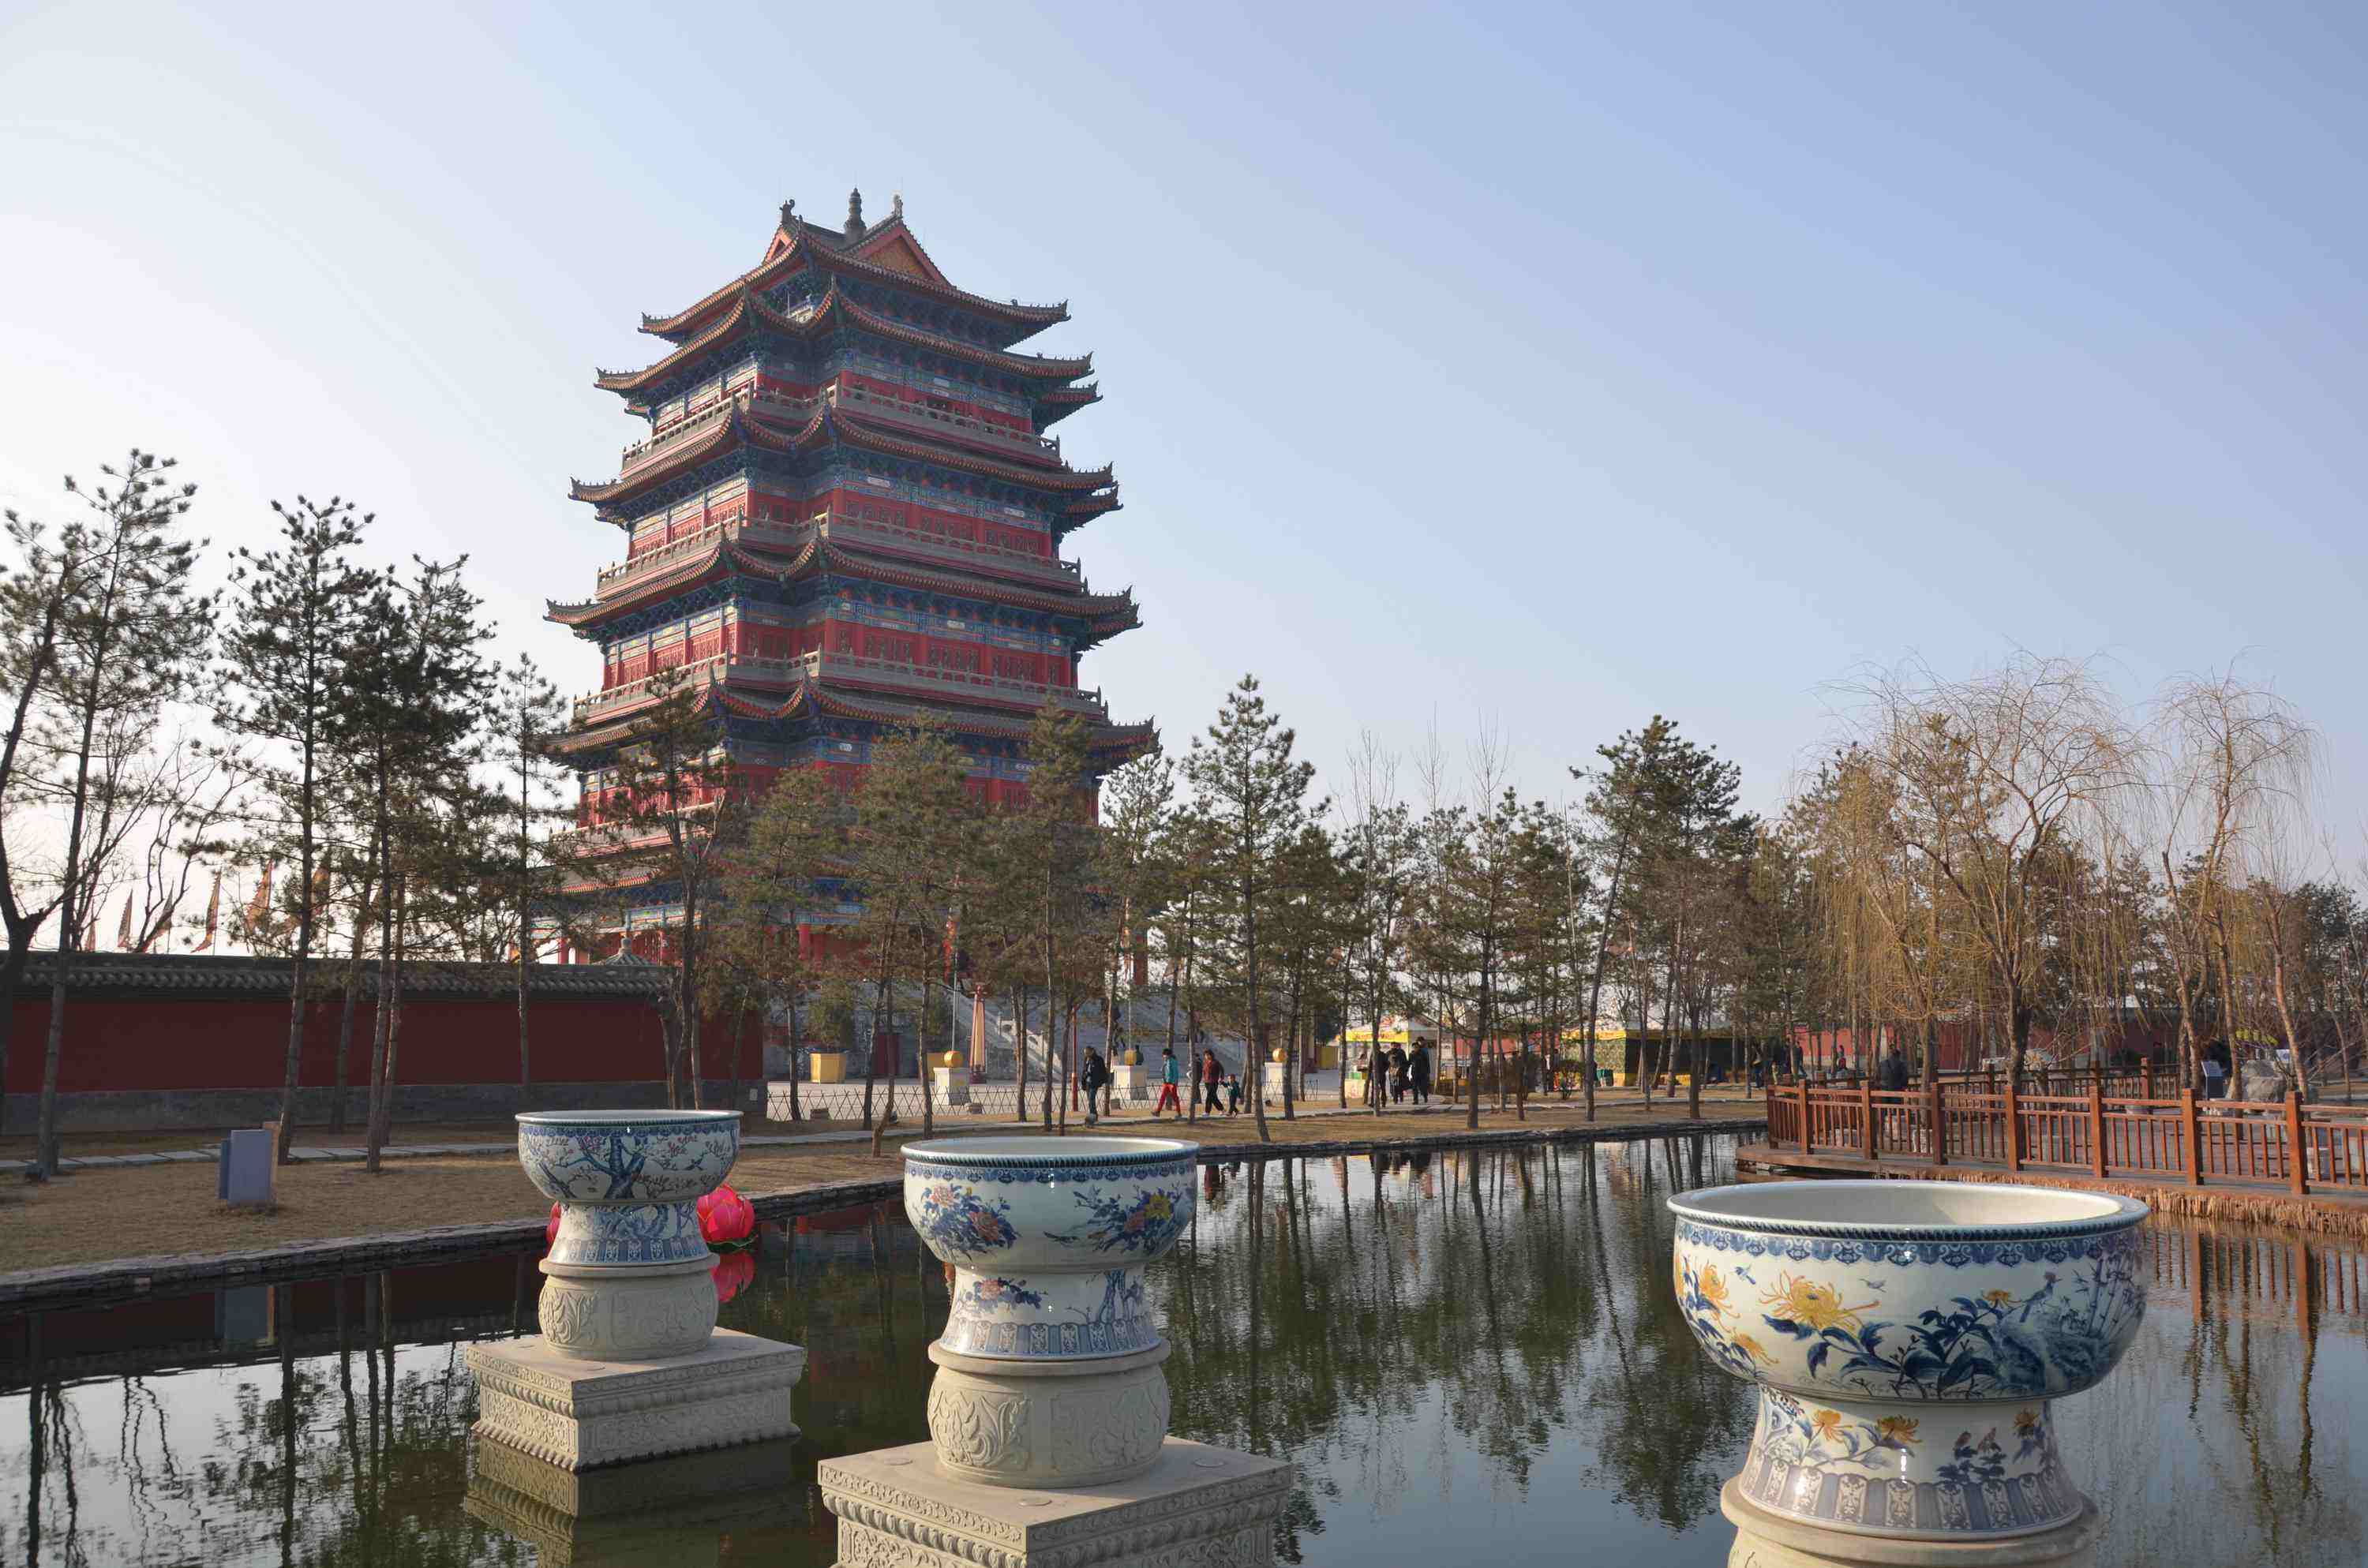 Daqin Pagoda is the remnant of the oldest surviving Christian church in China. Daqin is the name of the Roman Empire in the Chinese language documents of the 1st – 2nd centuries.